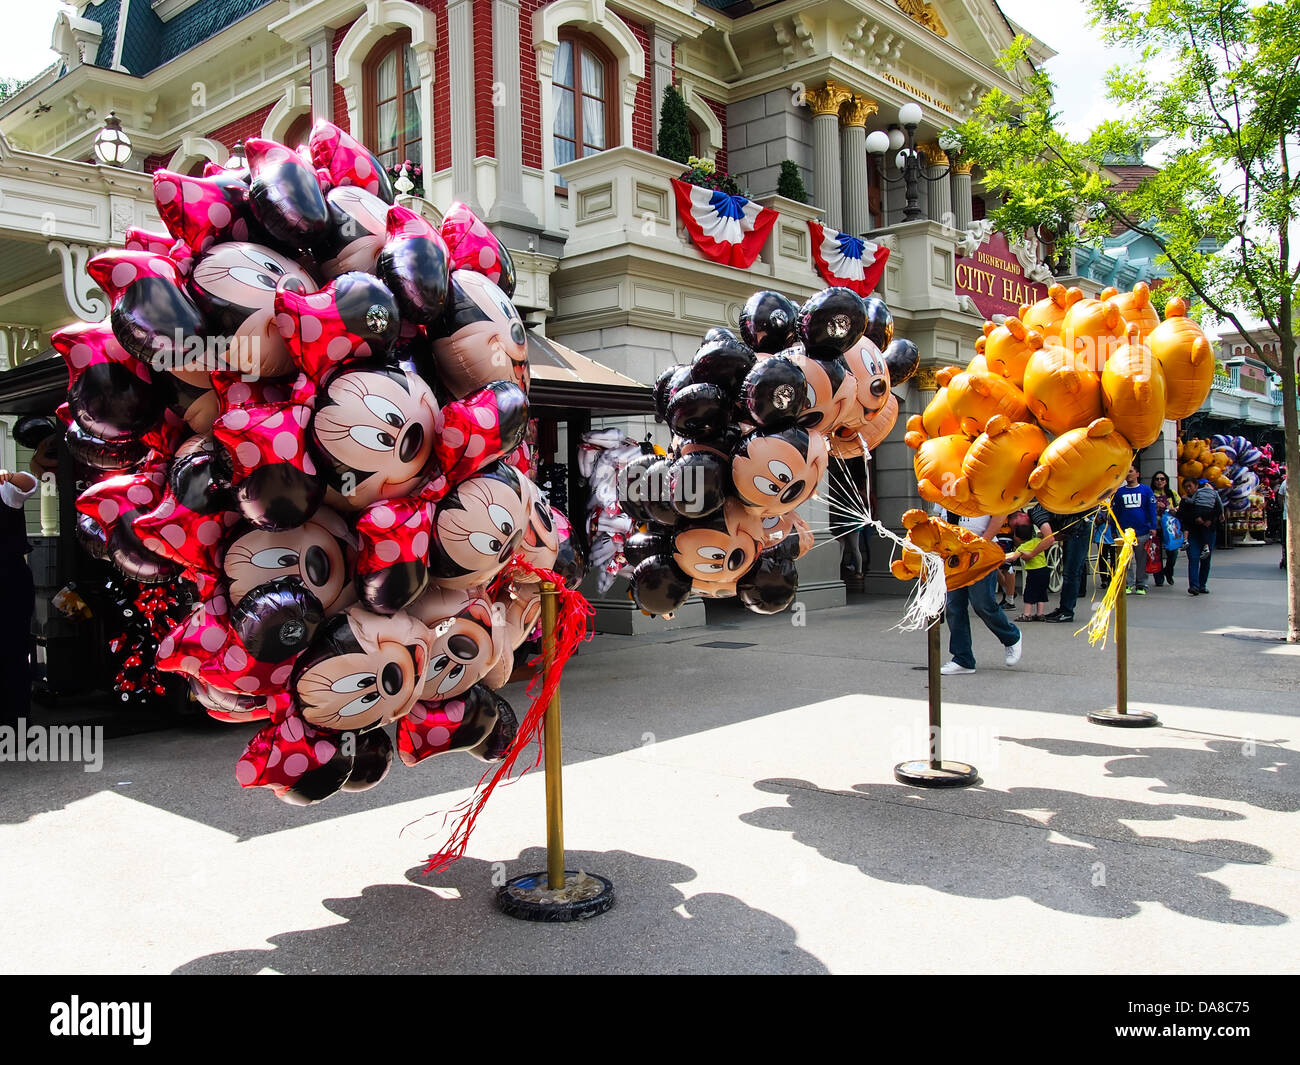 Mickey Mouse, Minnie mouse and Winnie the Pooh helium balloons on sale on Main street at Disneyland Paris Stock Photo